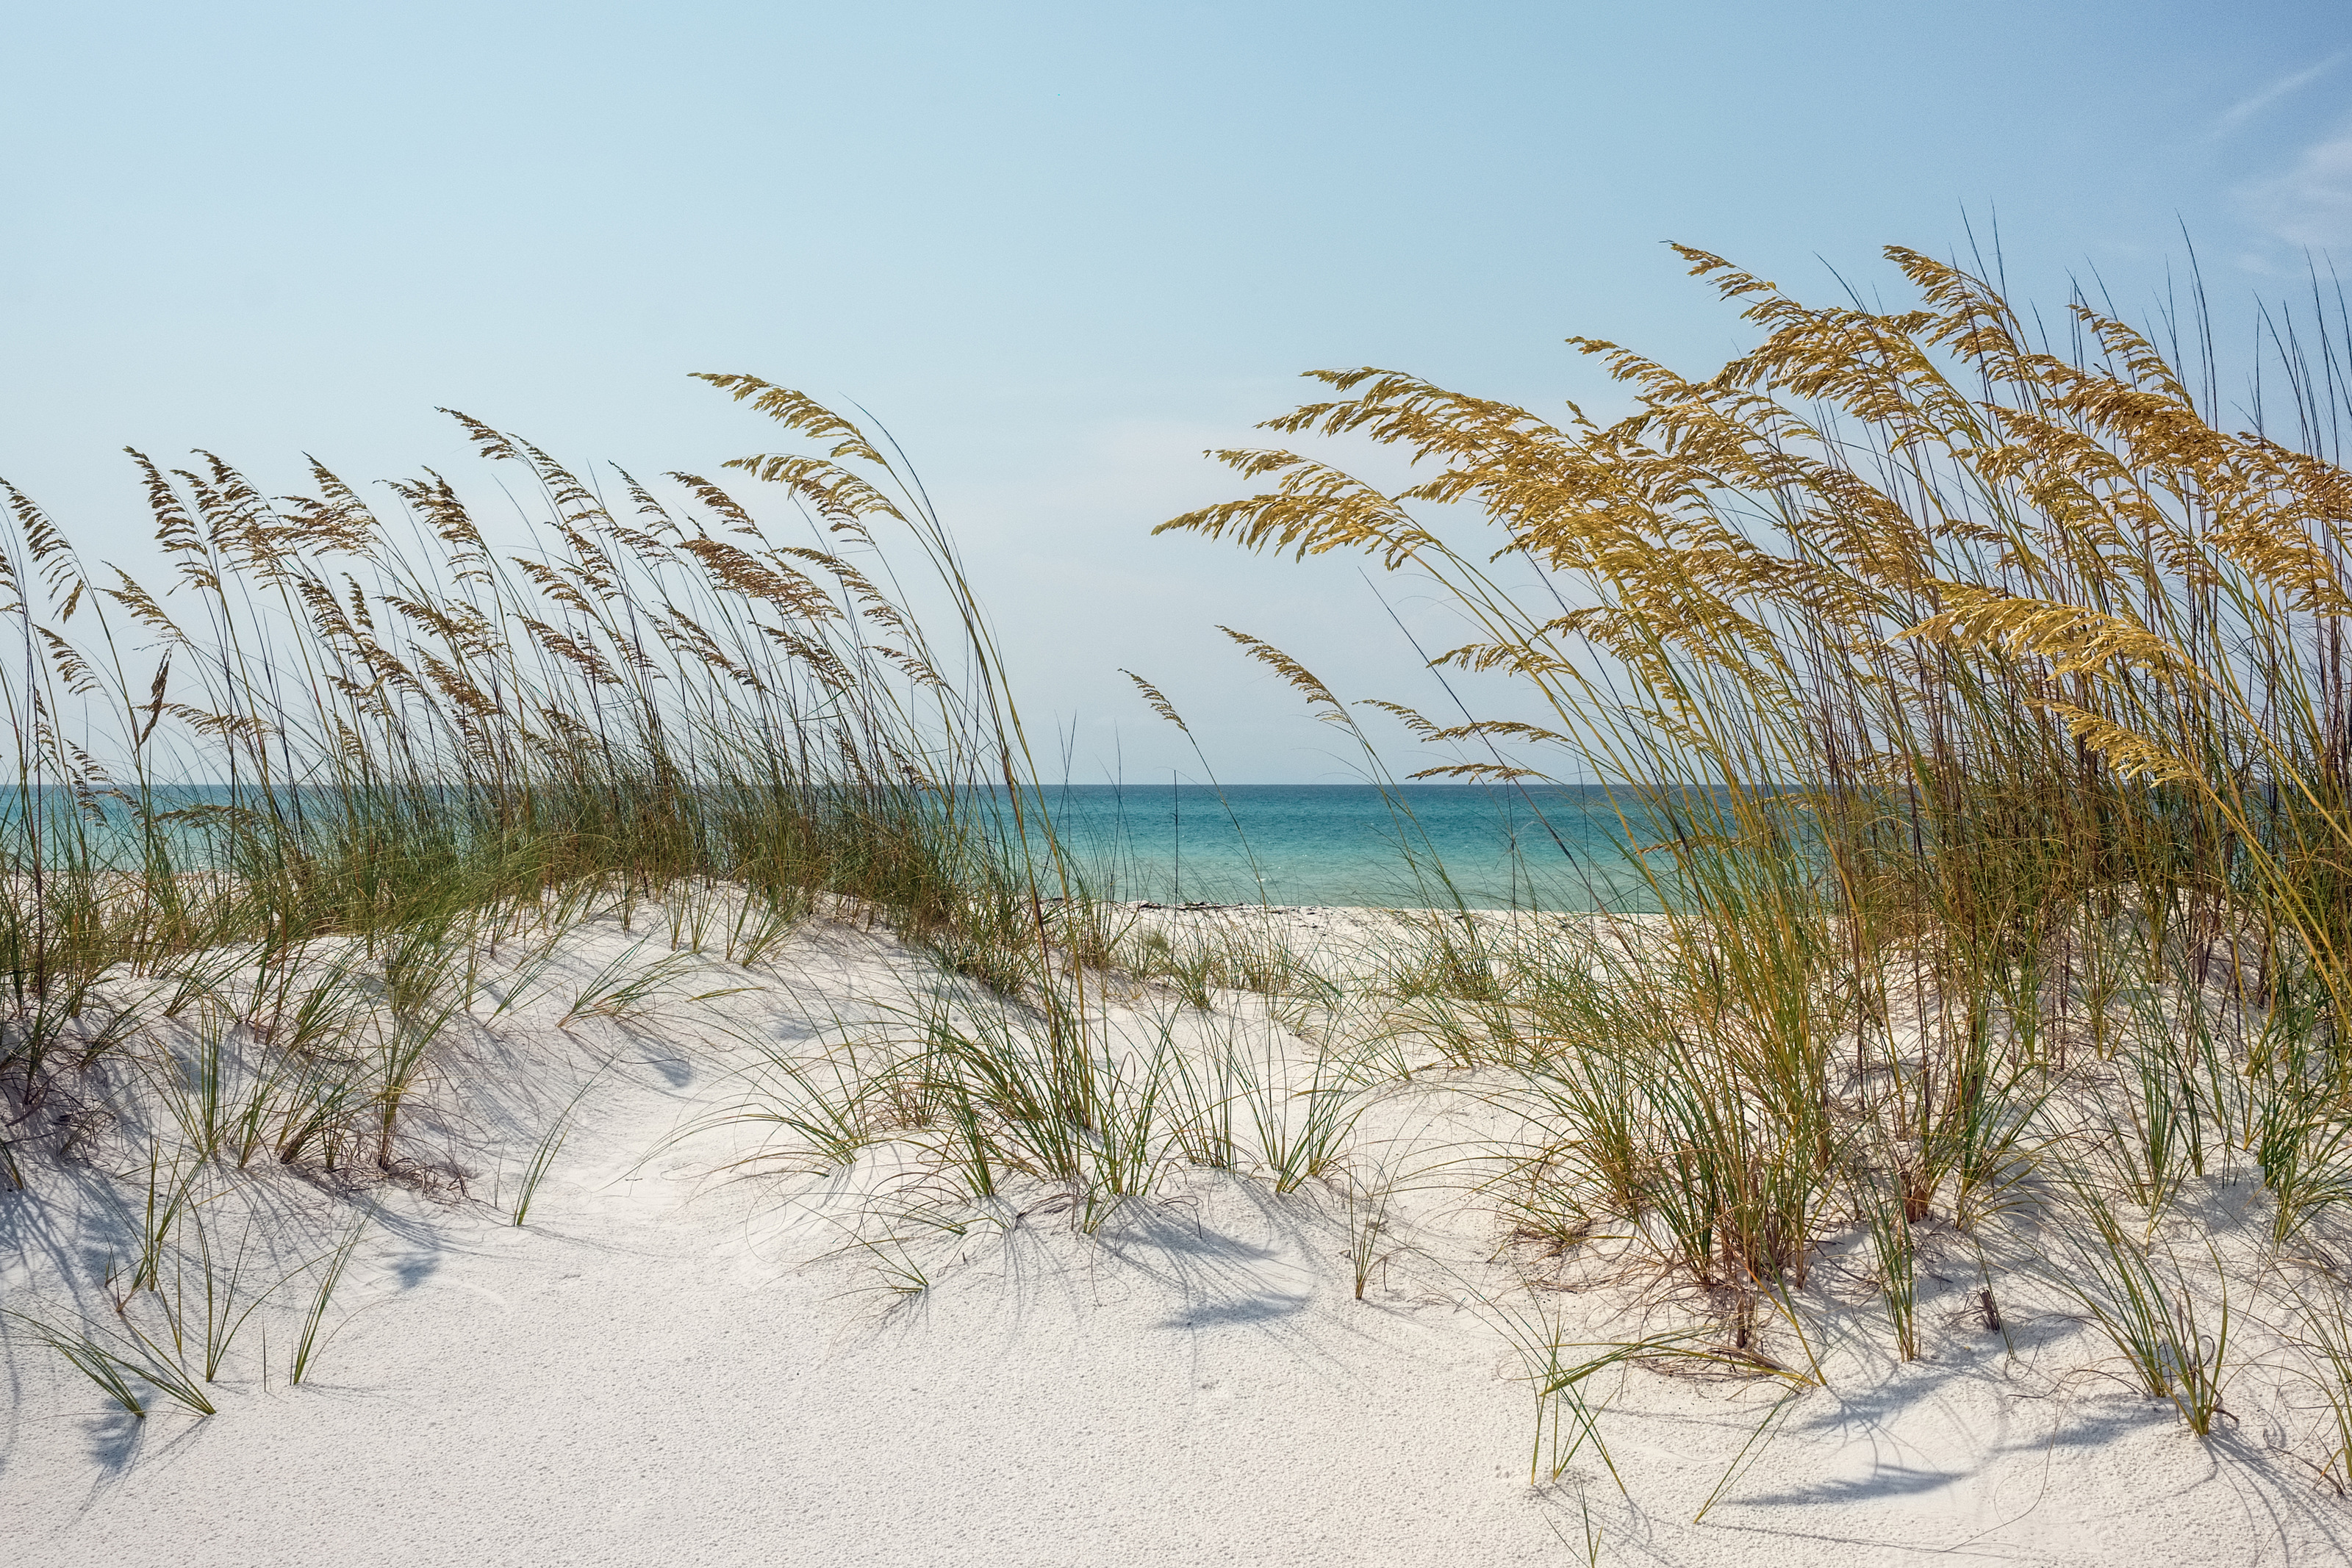 Florida Sand Dunes And Sea Oats At The Beach Wall Mural - Murals Your Way